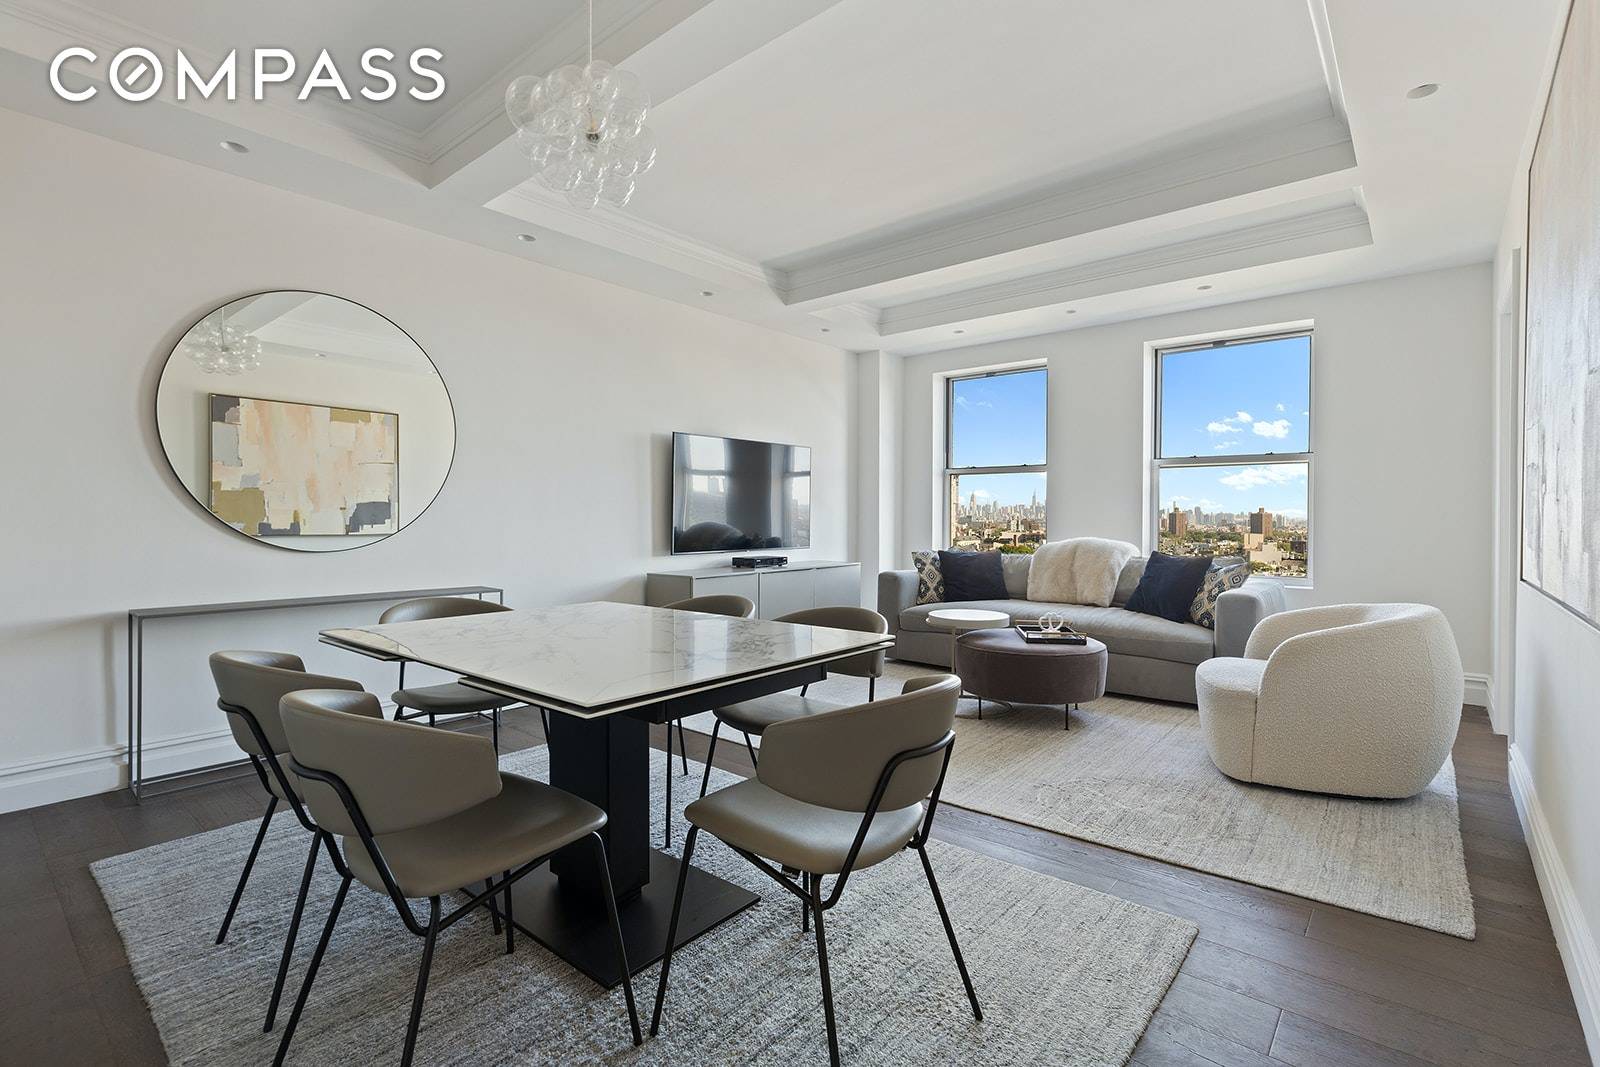 Perched above the Brooklyn rooftops sits this exquisitely renovated 2 bedroom, 2 bathroom coop in premier, full service Turner Towers.